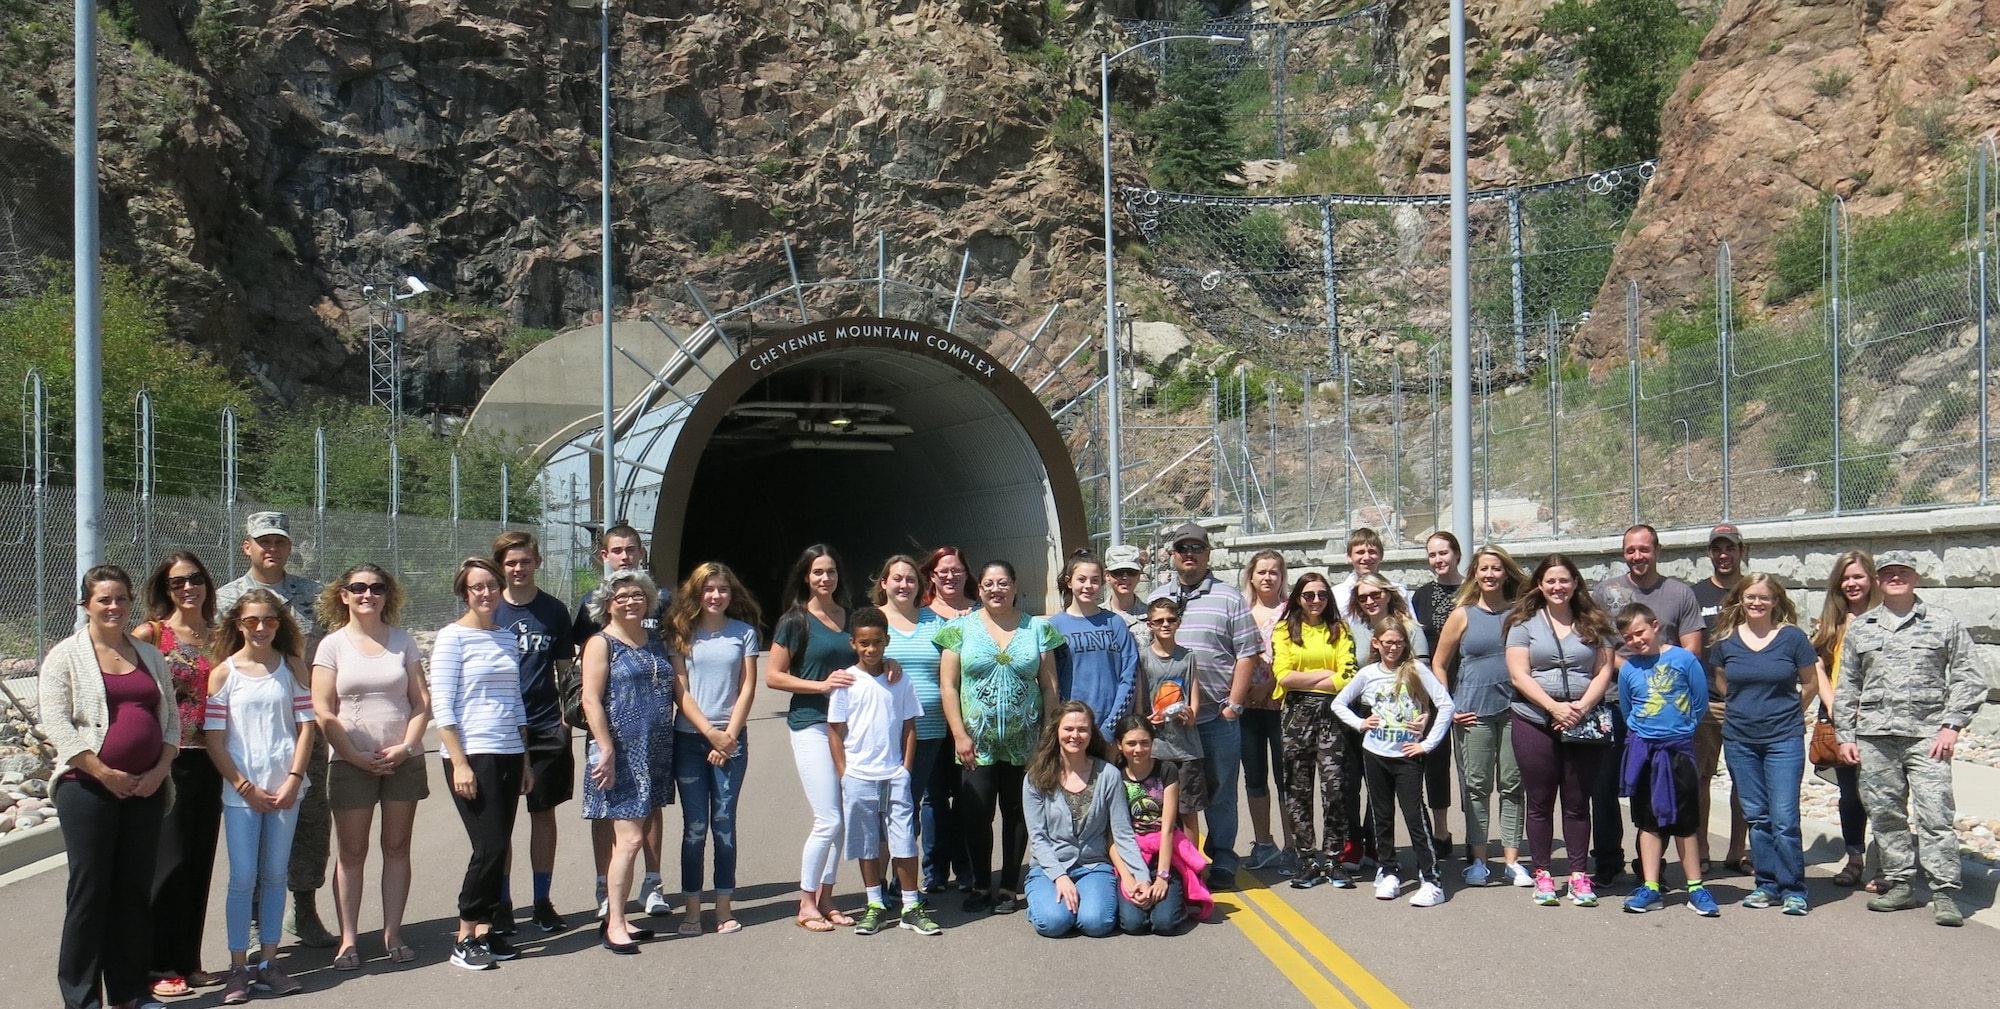 Spouses and significant others of the 14th Test Squadron before they entered the Cheyenne Mountain Complex near Colorado Springs, Colo. August 4, 2018. The secretive base is best known as a NORAD facility and has been featured in several movies and television shows.